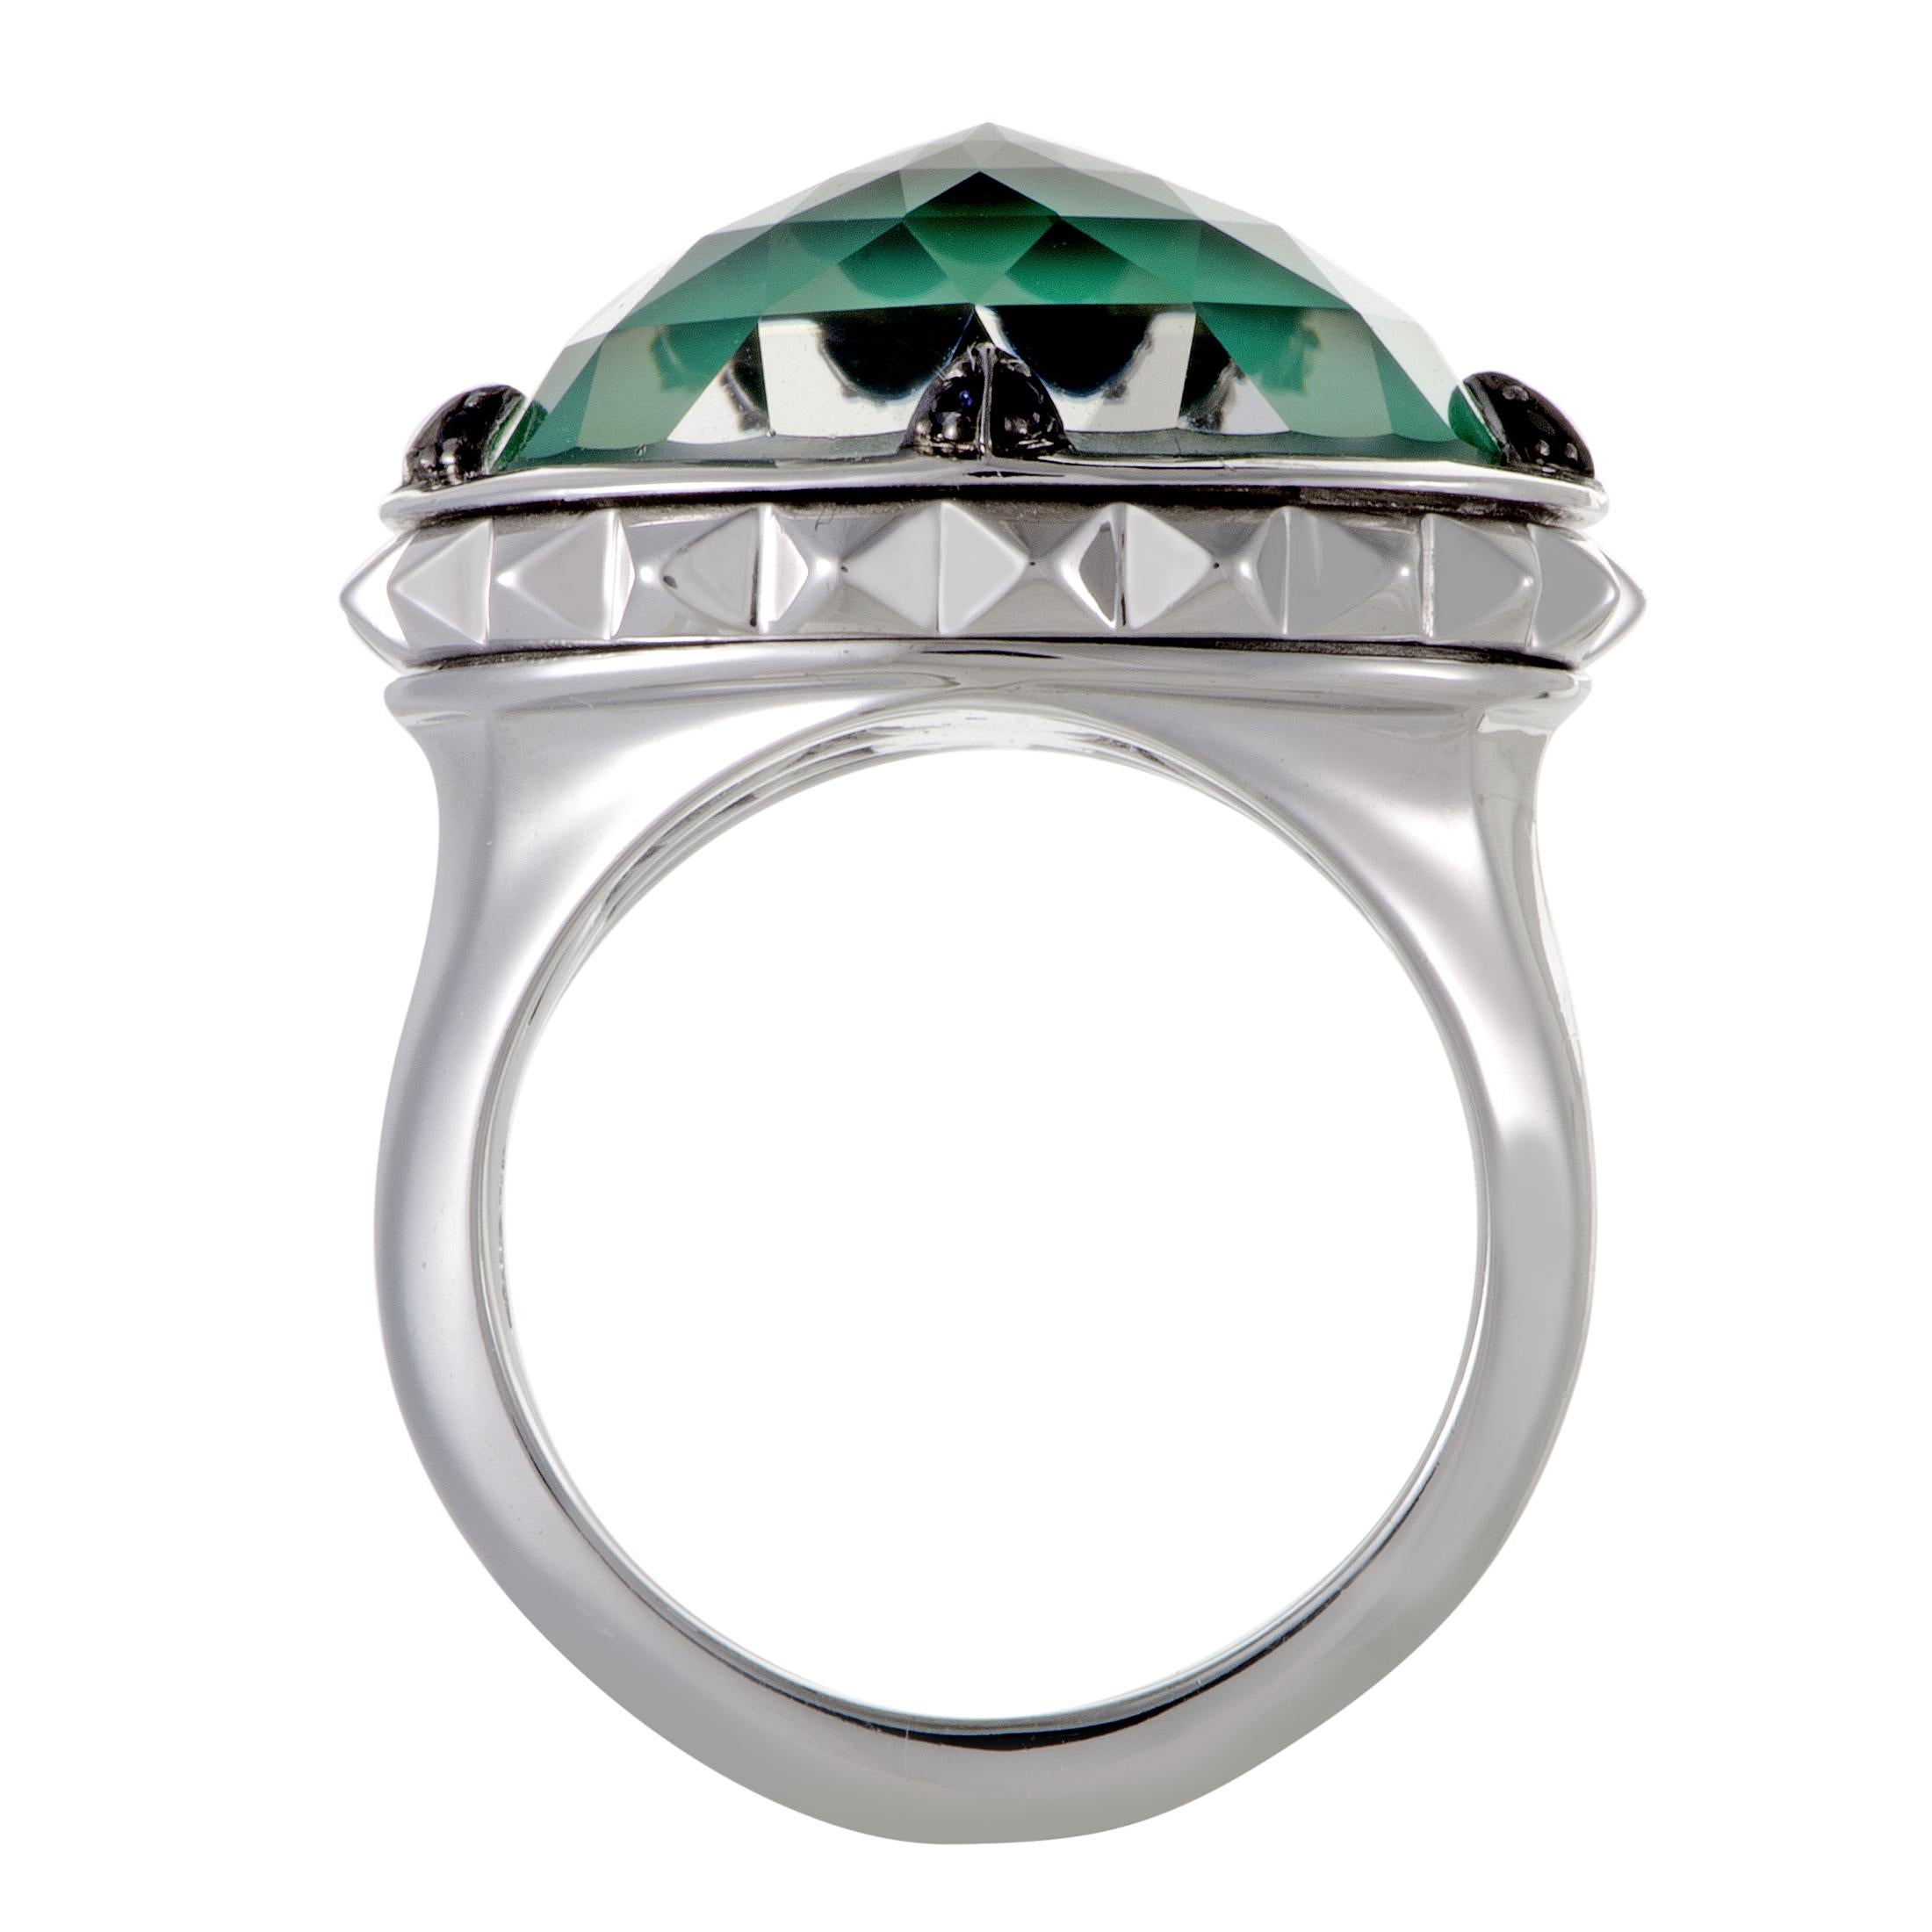 Set with gorgeously appealing chrysoprase, extravagantly beautiful quartz and luxuriously nifty black sapphires, that amount to 0.06 carats, this absolutely stunning ring from Stephen Webster's esteemed 'Superstud' collection is attractively crafted